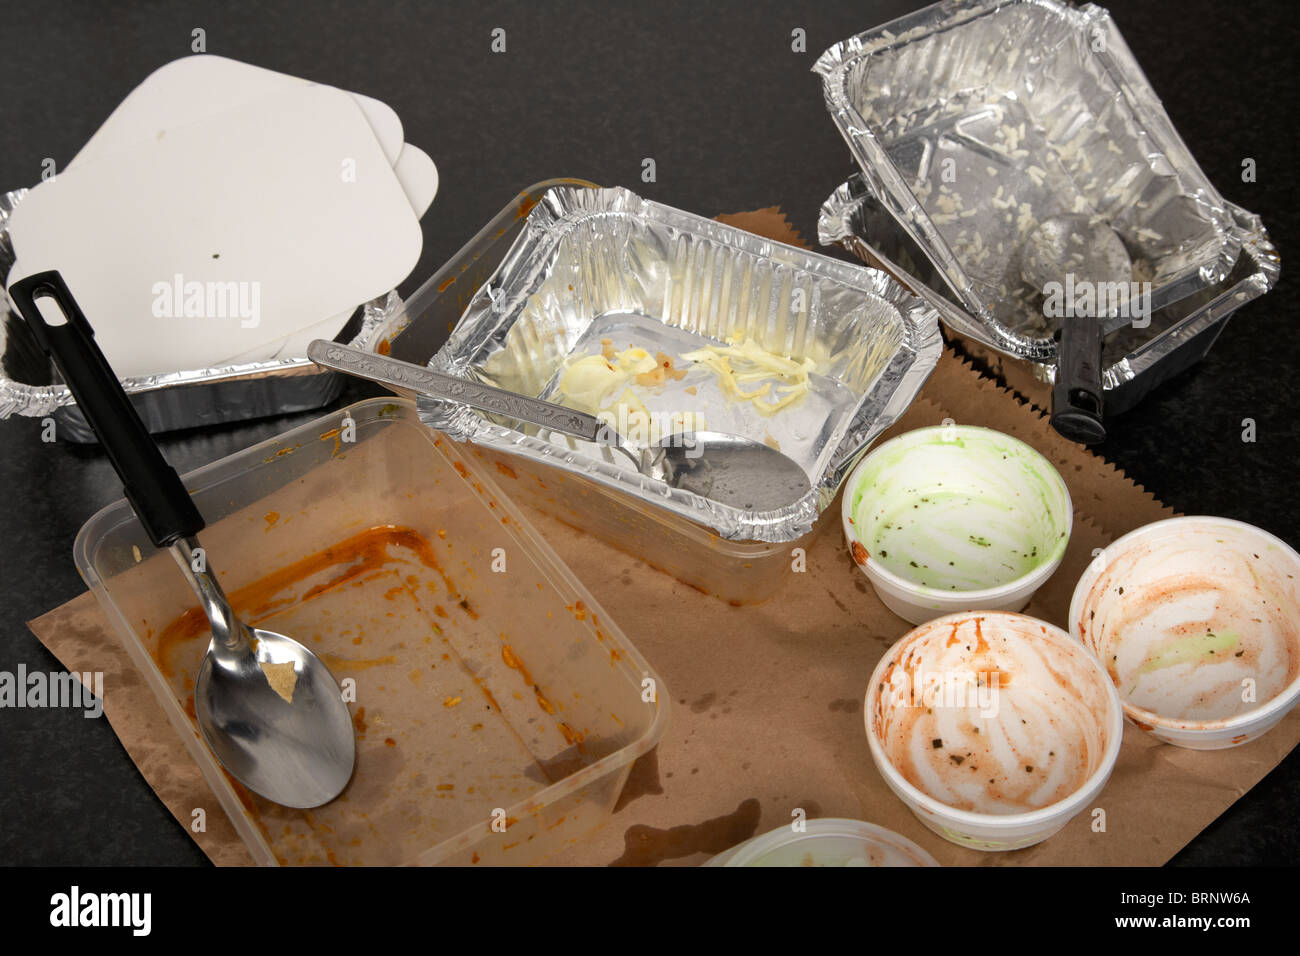 empty fast food cartons from an indian home takeaway Stock Photo